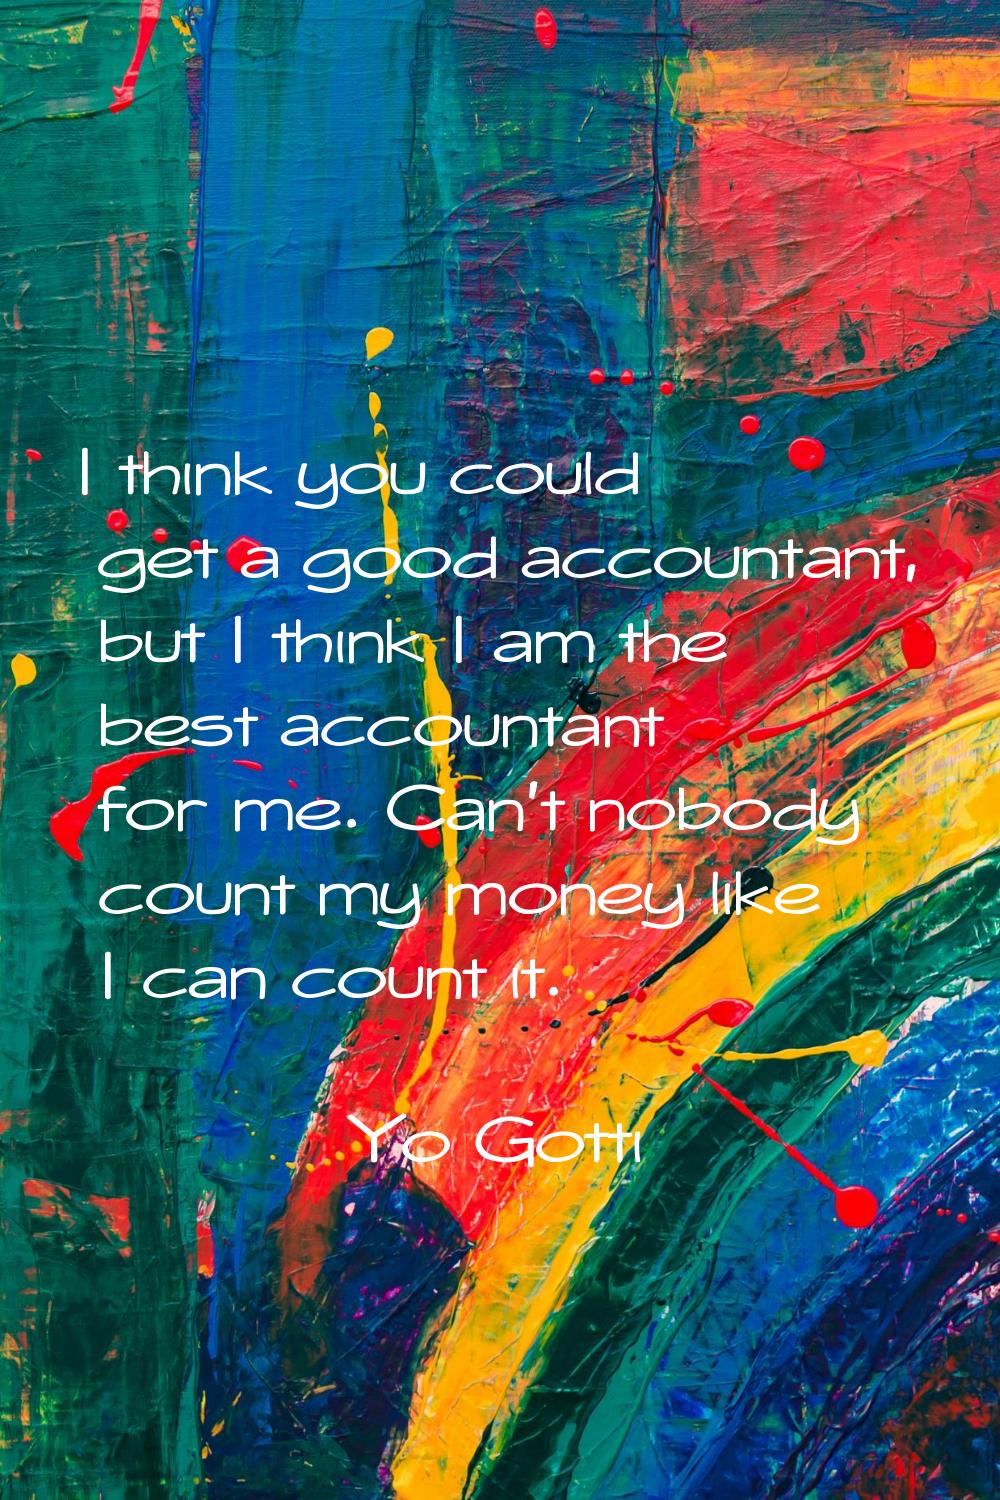 I think you could get a good accountant, but I think I am the best accountant for me. Can't nobody 